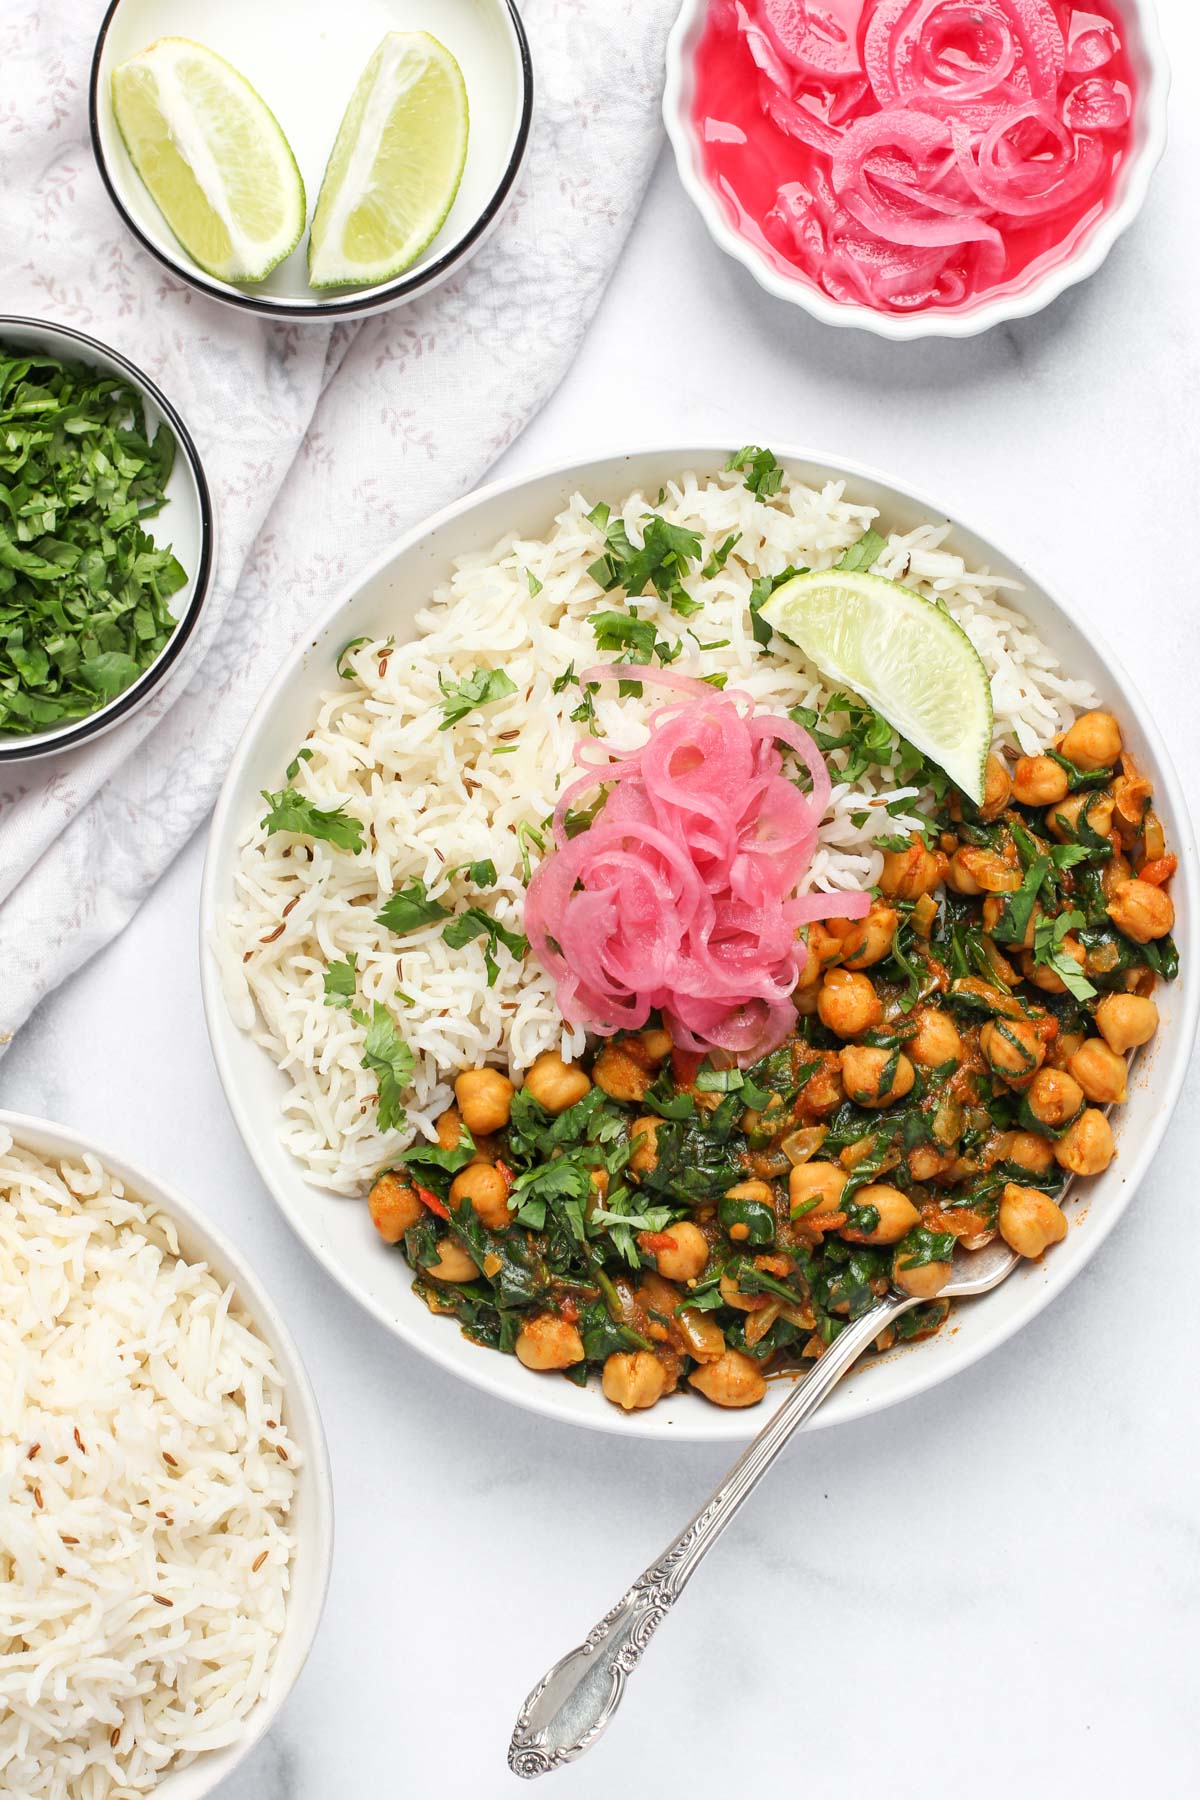 Chickpeas with spinach served with jeera rice 